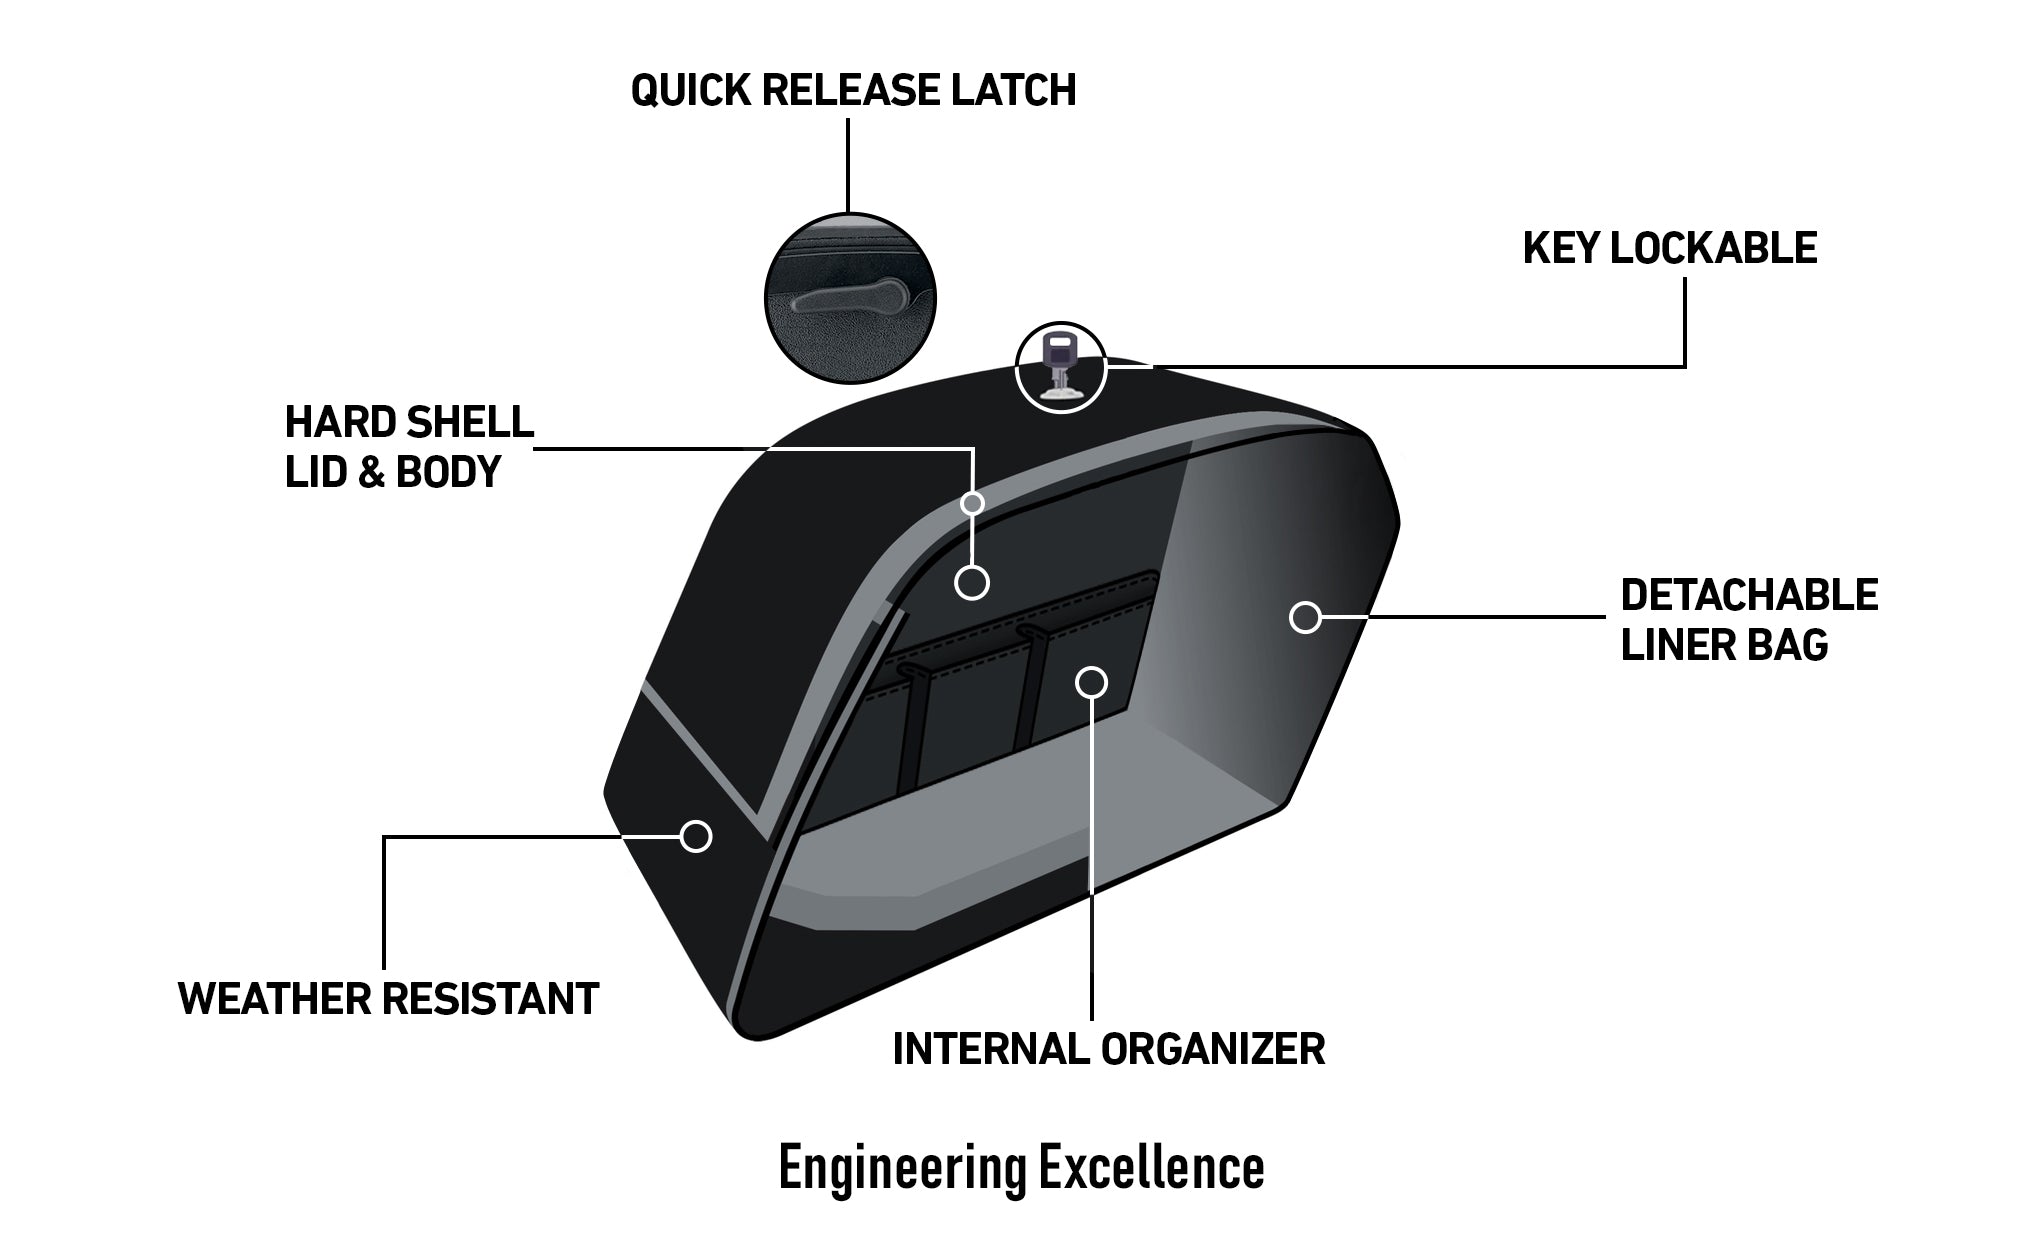 Viking Baldur Extra Large Matte Motorcycle Hard Saddlebags For Harley Softail Street Bob Fxbb Engineering Excellence with Bag on Bike @expand